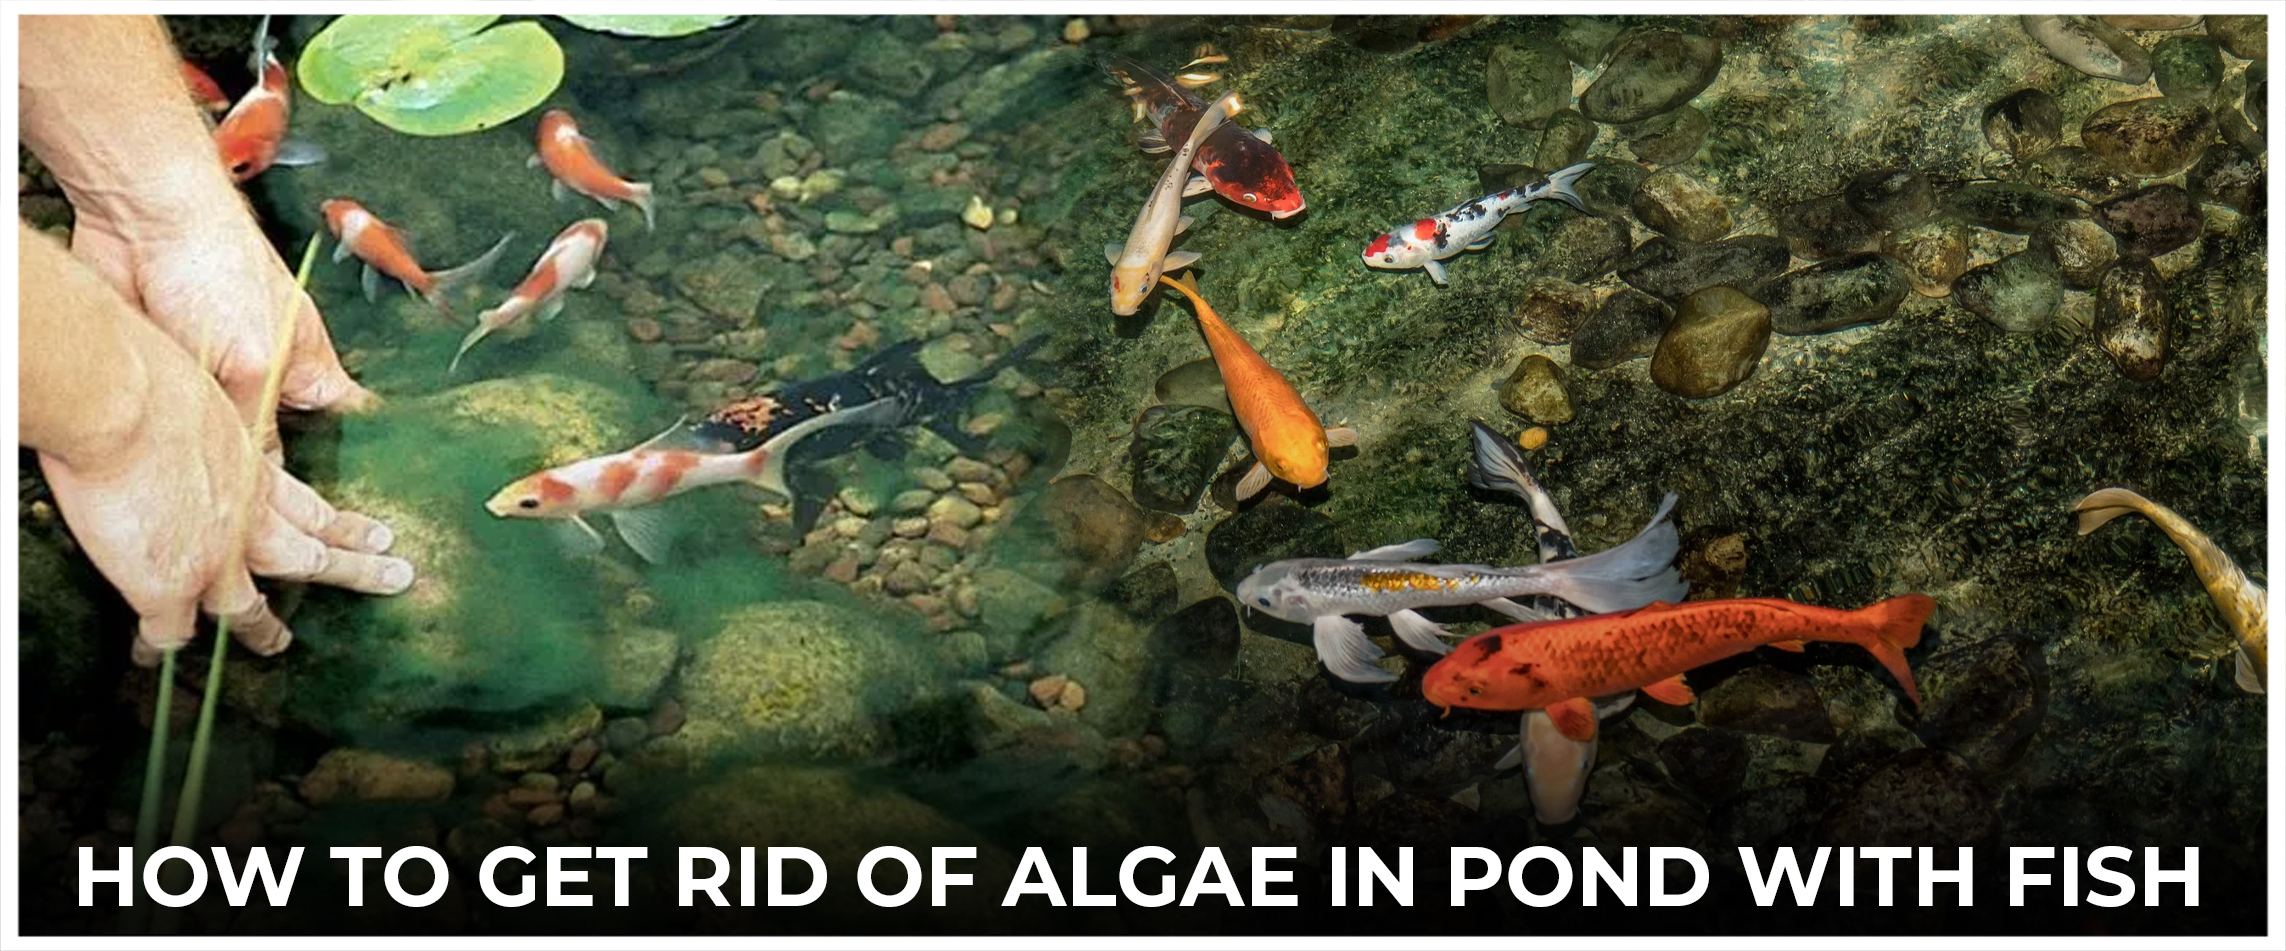 How to Get Rid of Algae in Pond with Fish